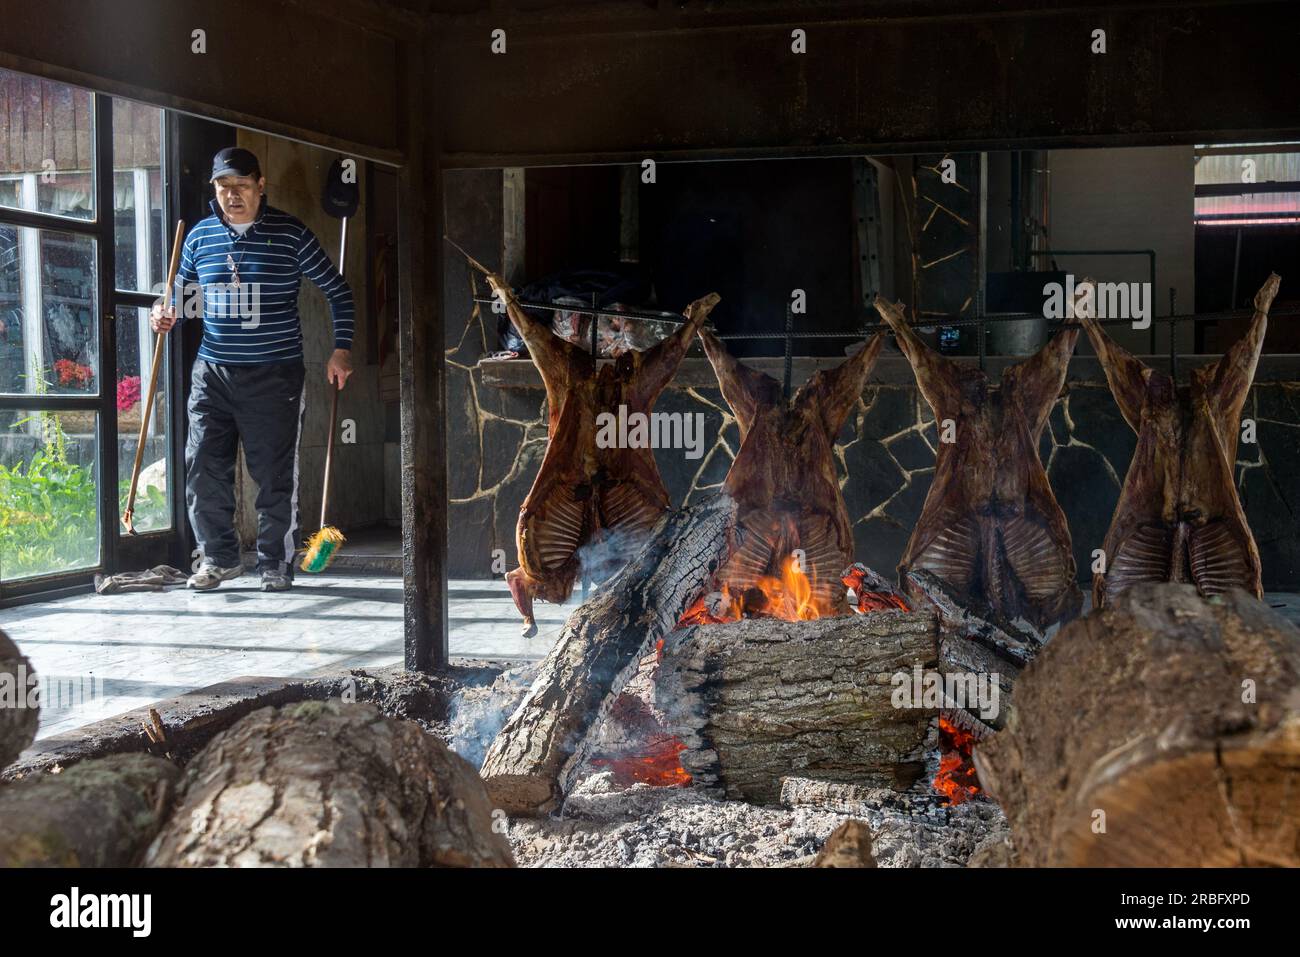 Man cooking the famous Fuegian lamb with a barbecue inside a restaurant, in Ushuaia, Argentina Stock Photo